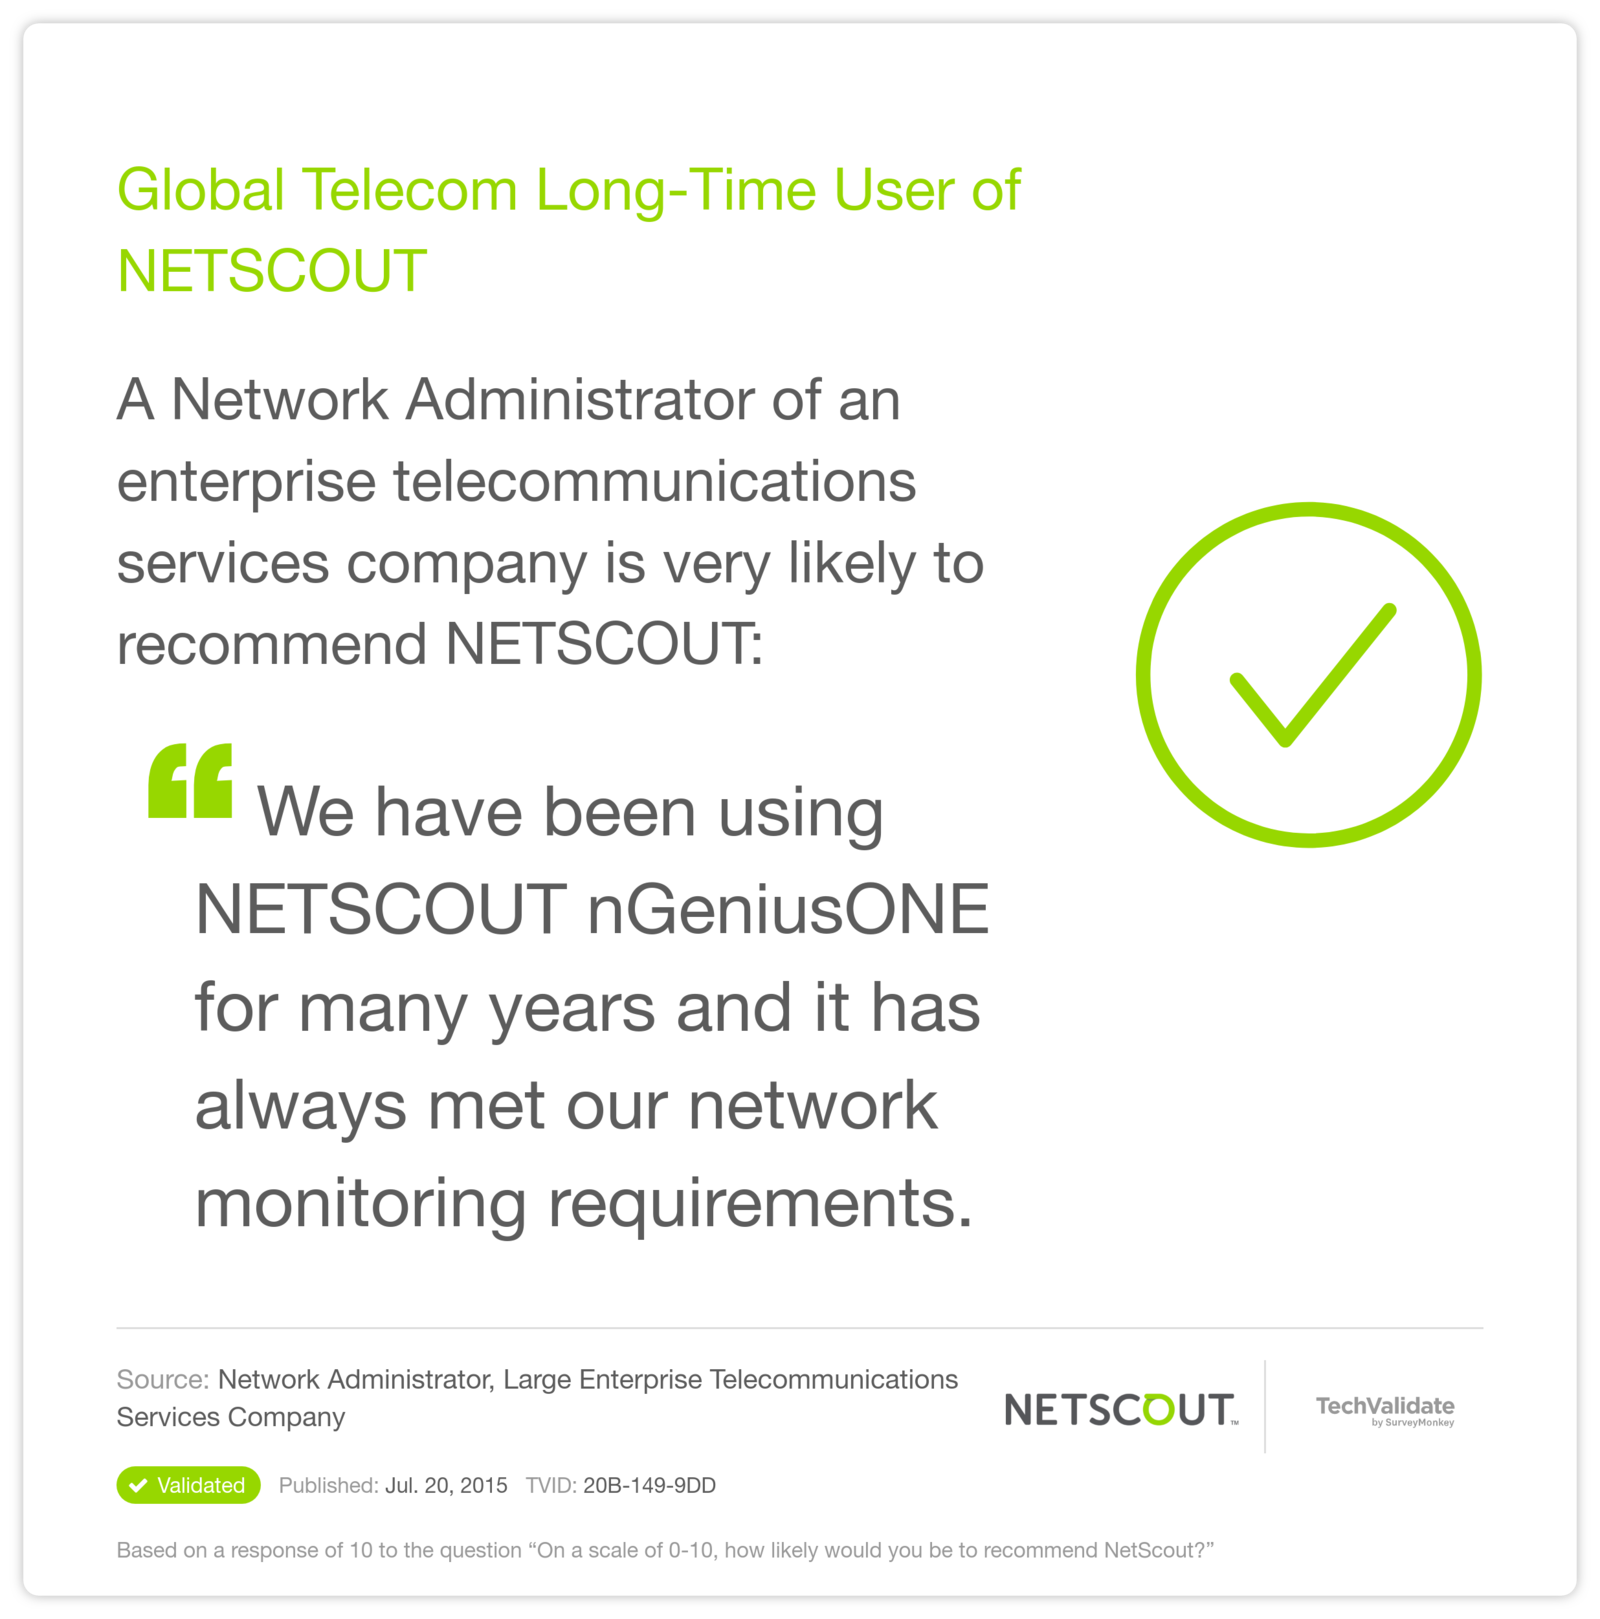 Global Telecom Long-Time User of NETSCOUT